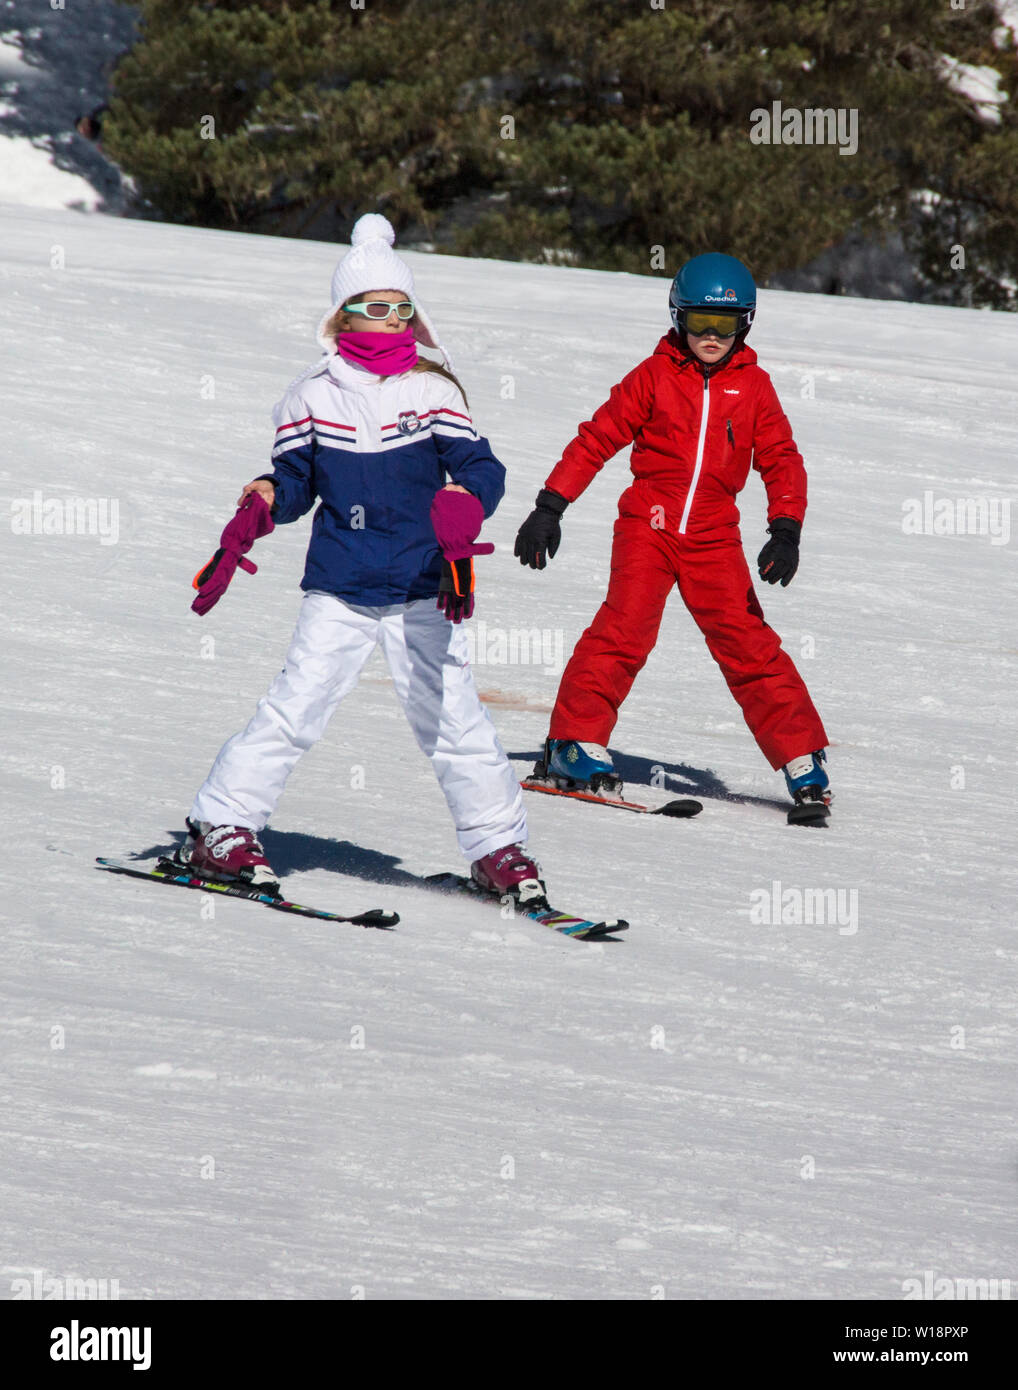 The central Pyrenees at Pont Espagne. Young children learning to ski on the beginners slope.No sticks. Stock Photo